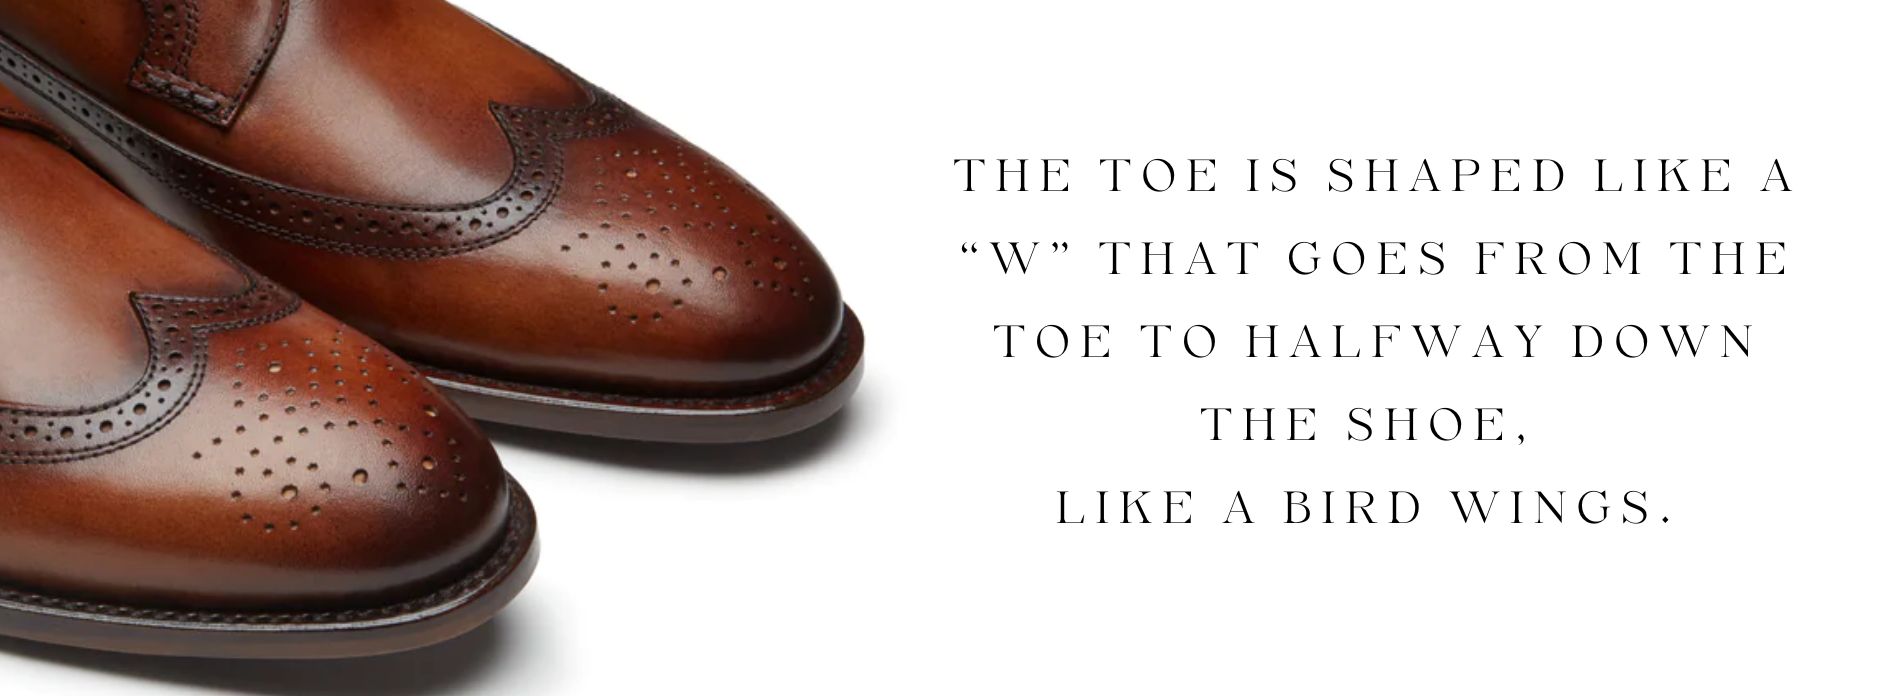 wingtip-shoes-a-classic-look-in-menswear